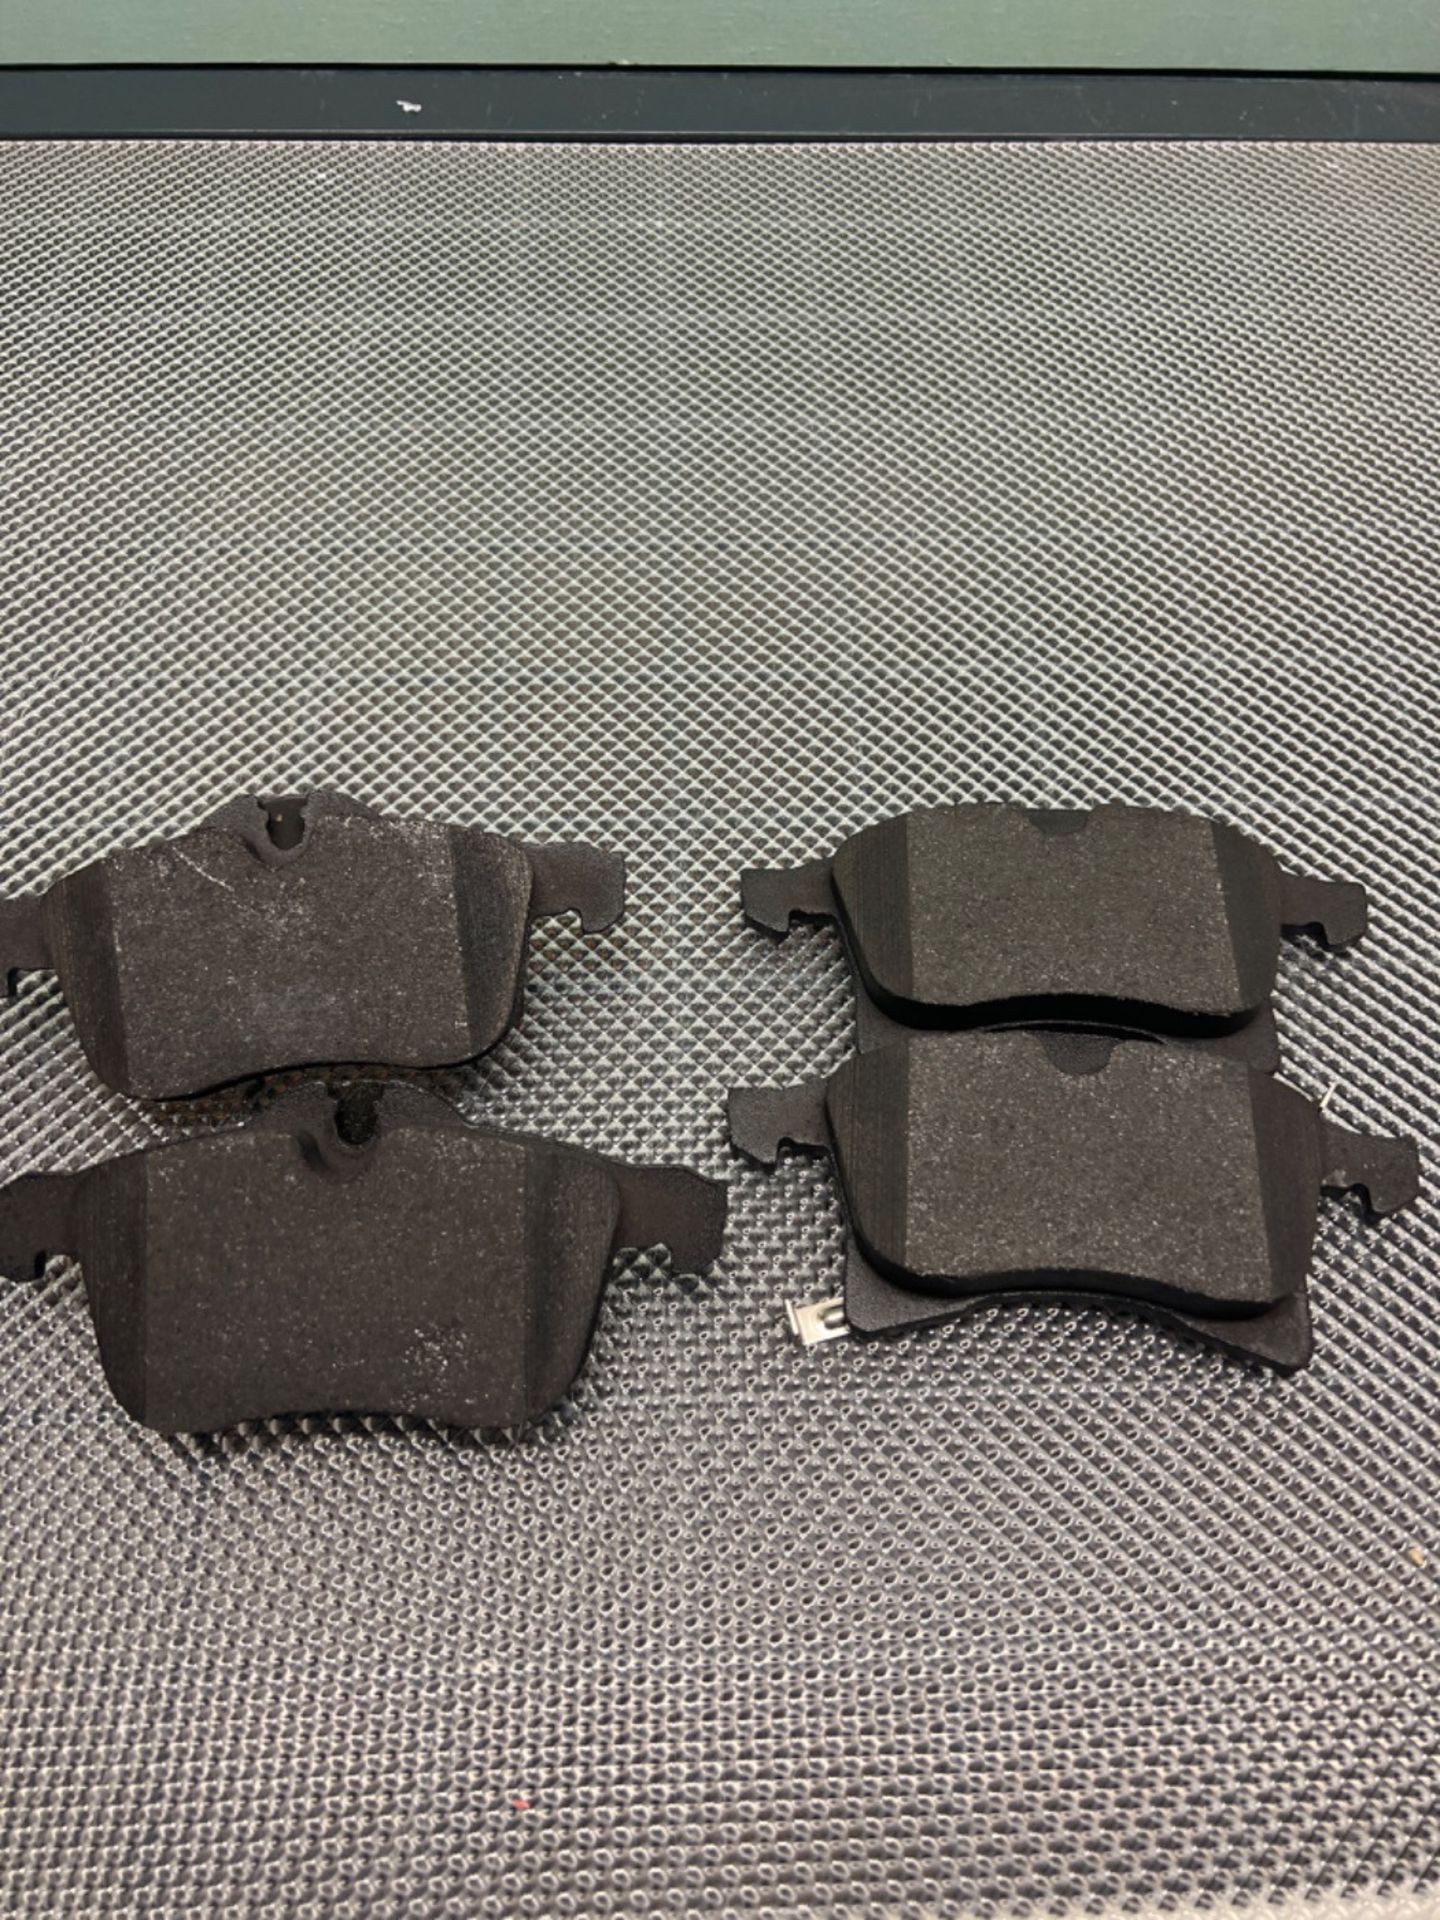 Bosch BP420 Brake Pads - Front Axle - ECE-R90 Certified - 1 Set of 4 Pads - Image 2 of 3